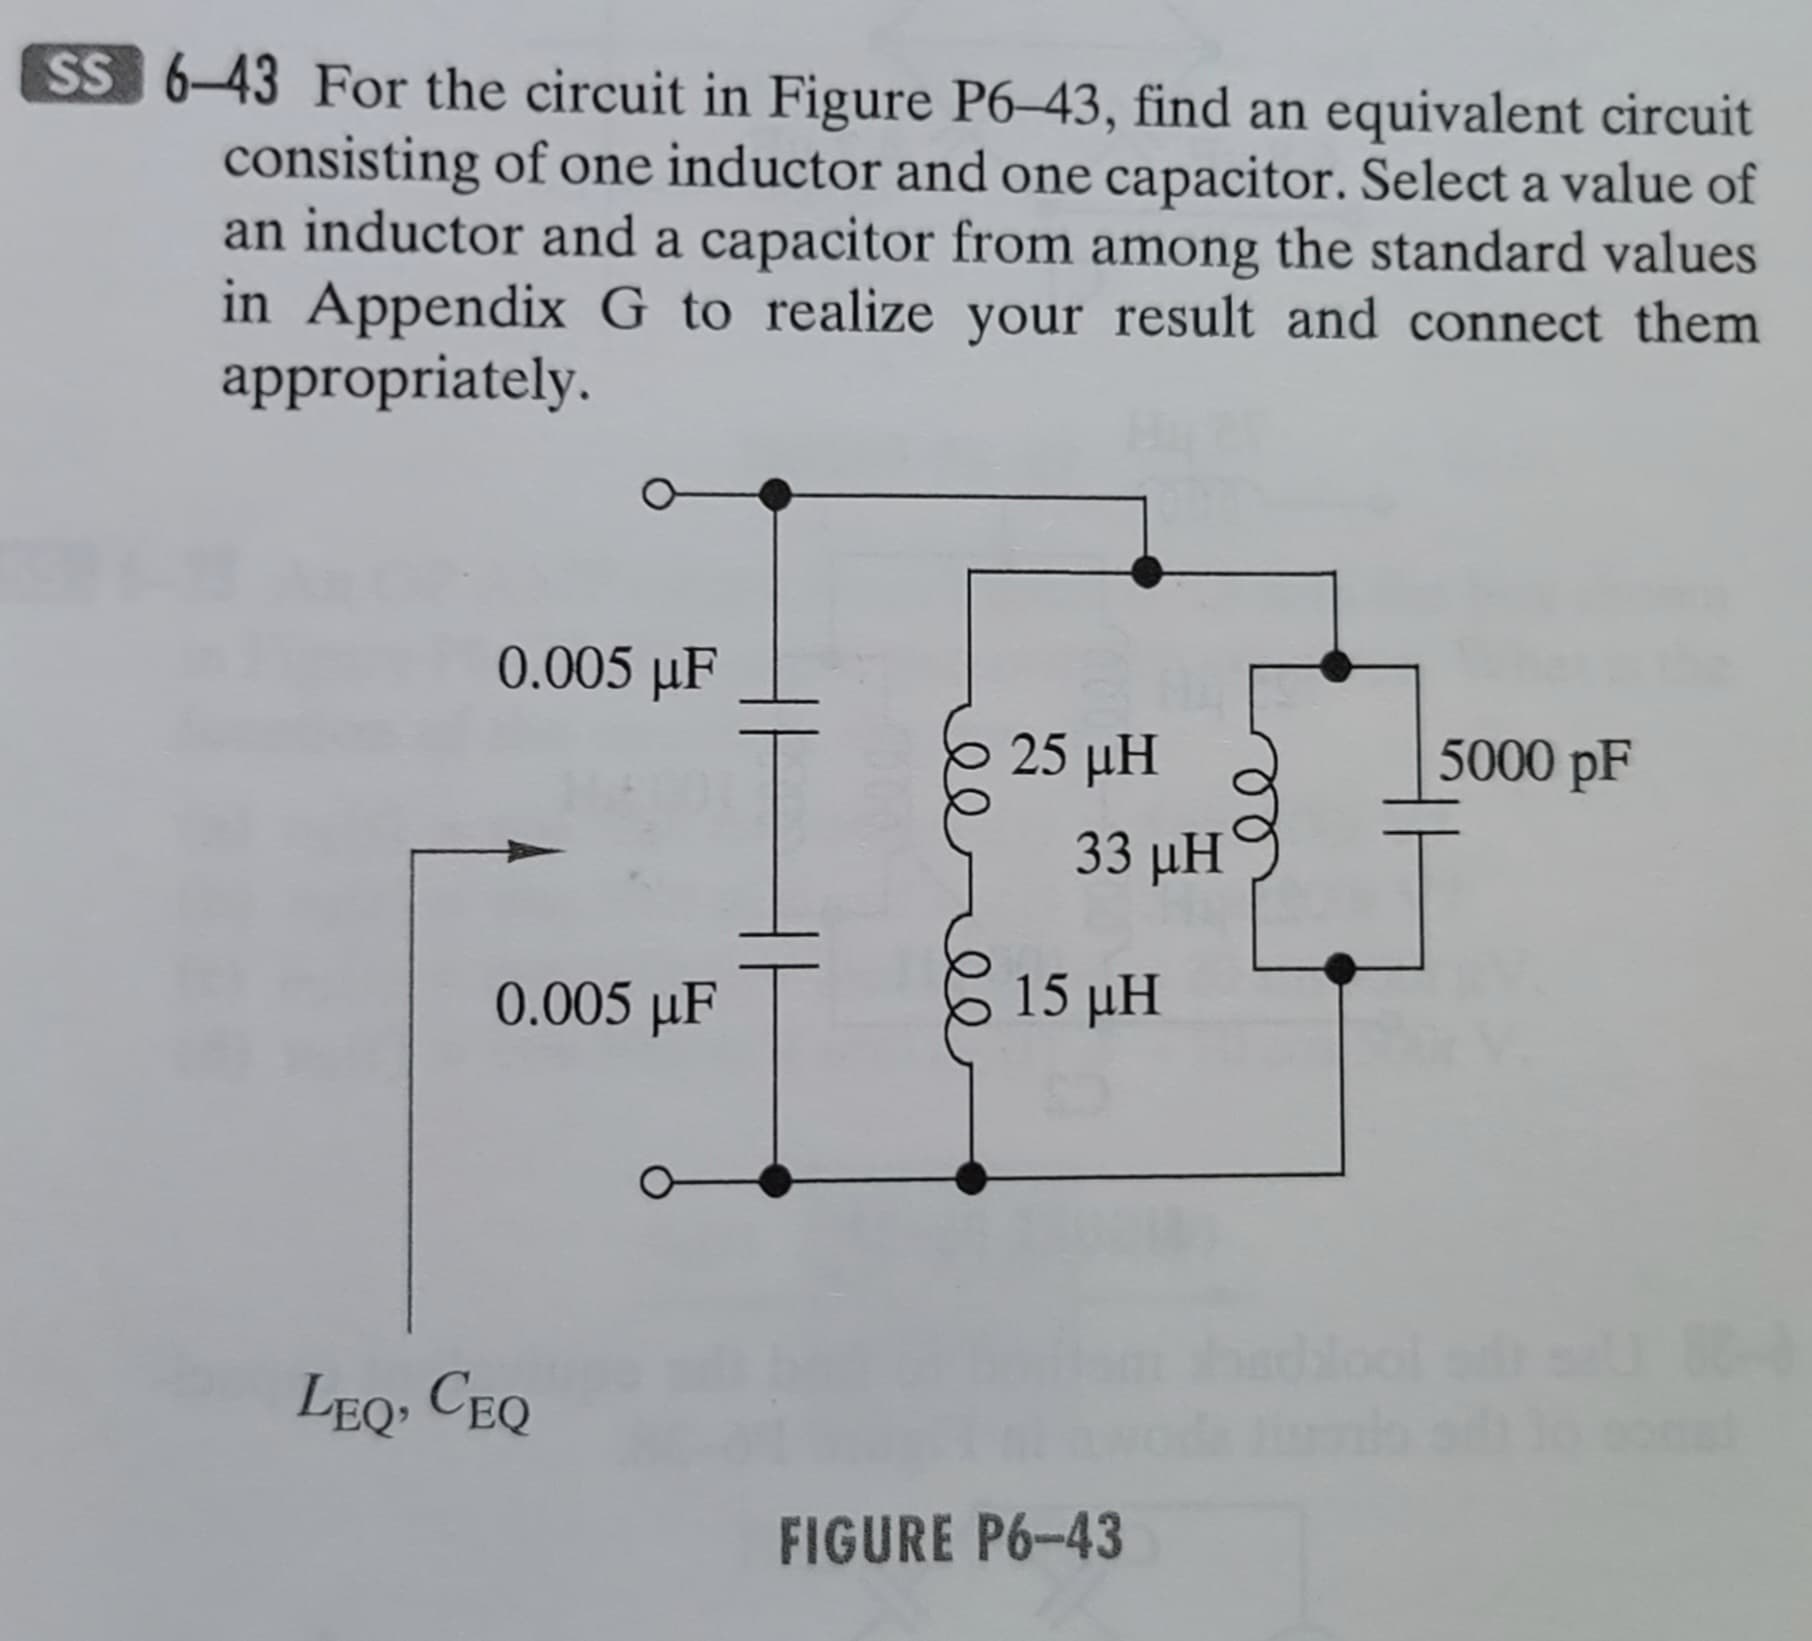 SS 6-43 For the circuit in Figure P6-43, find an equivalent circuit
consisting of one inductor and one capacitor. Select a value of
an inductor and a capacitor from among the standard values
in Appendix G to realize your result and connect them
appropriately.
0.005 µF
0.005 µF
LEQ, CEQ
25 μΗ
33 ΜΗ
15 pH
FIGURE P6-43
5000 pF